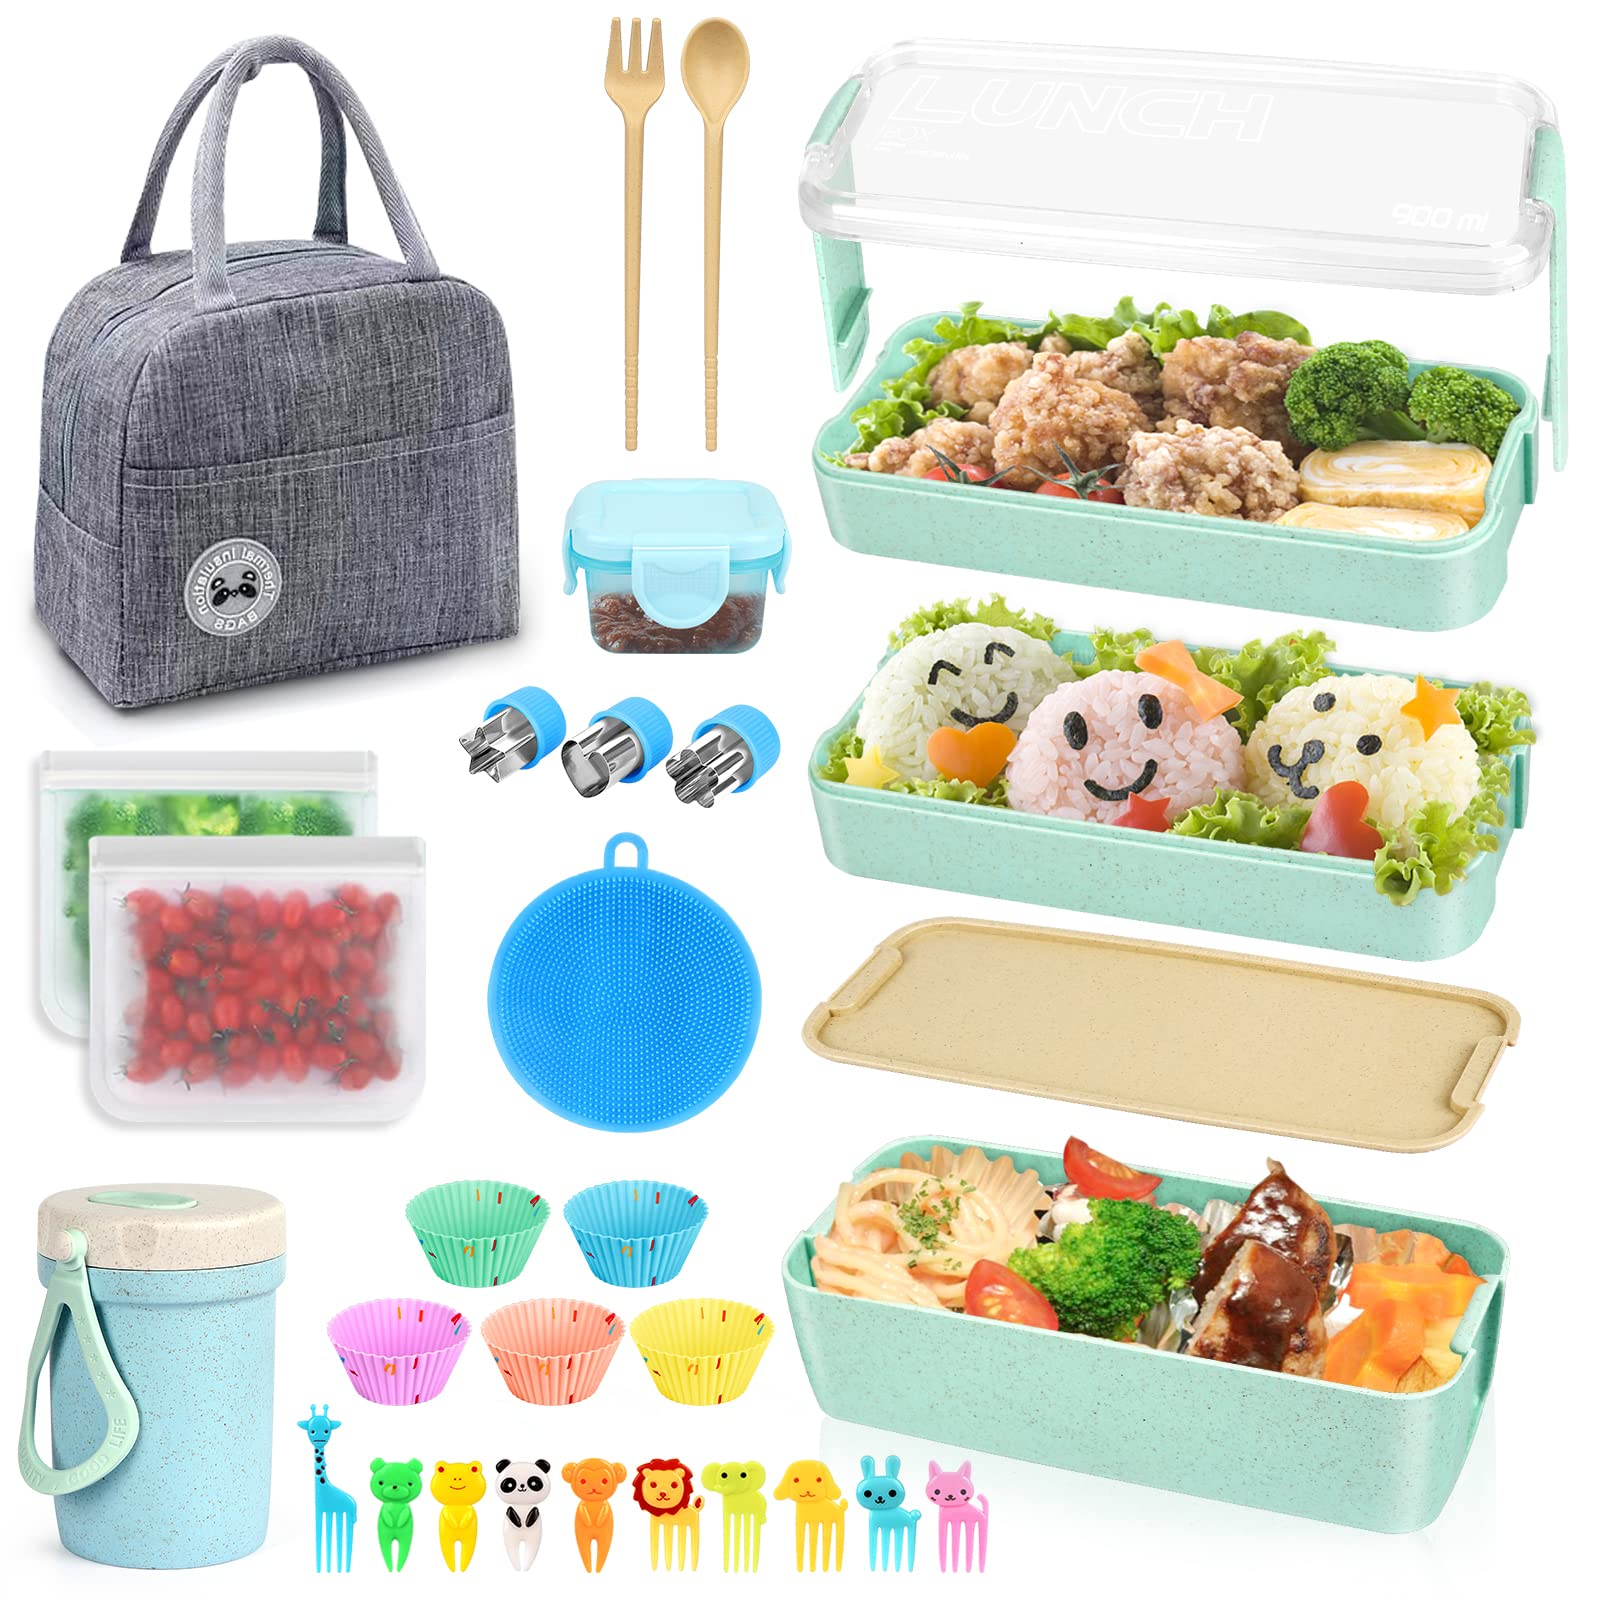 KIKYOUYA Bento Box Accessories with Mini Container, Cute Food Picks-4 Kinds  Set Lunch Accessories for kids and Adults